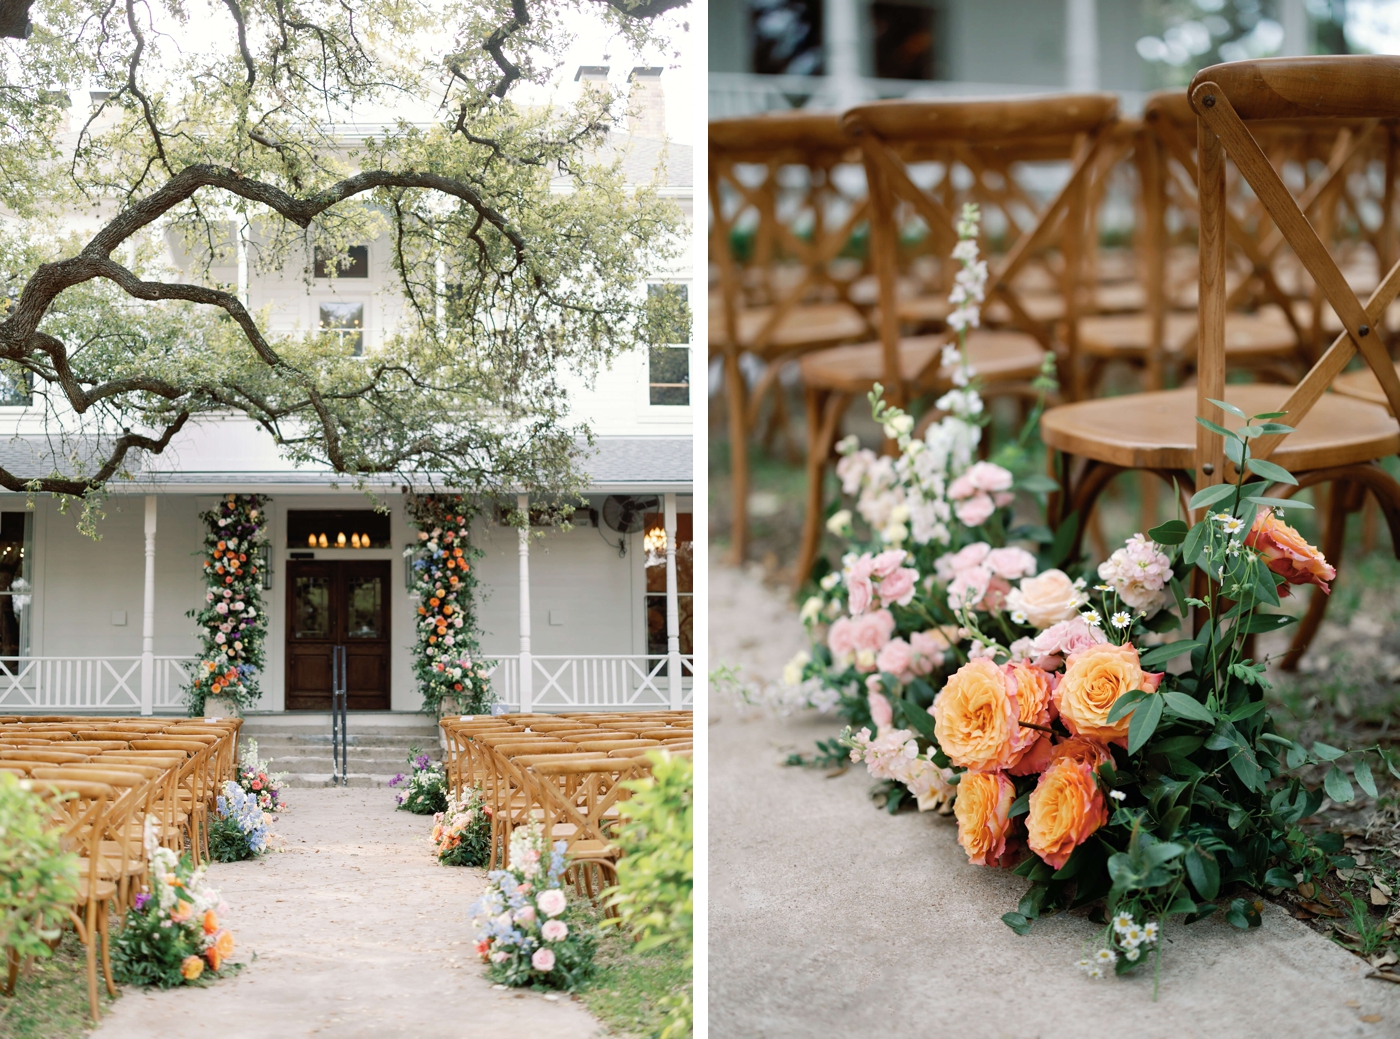 Colorful flowers line the wedding ceremony aisle